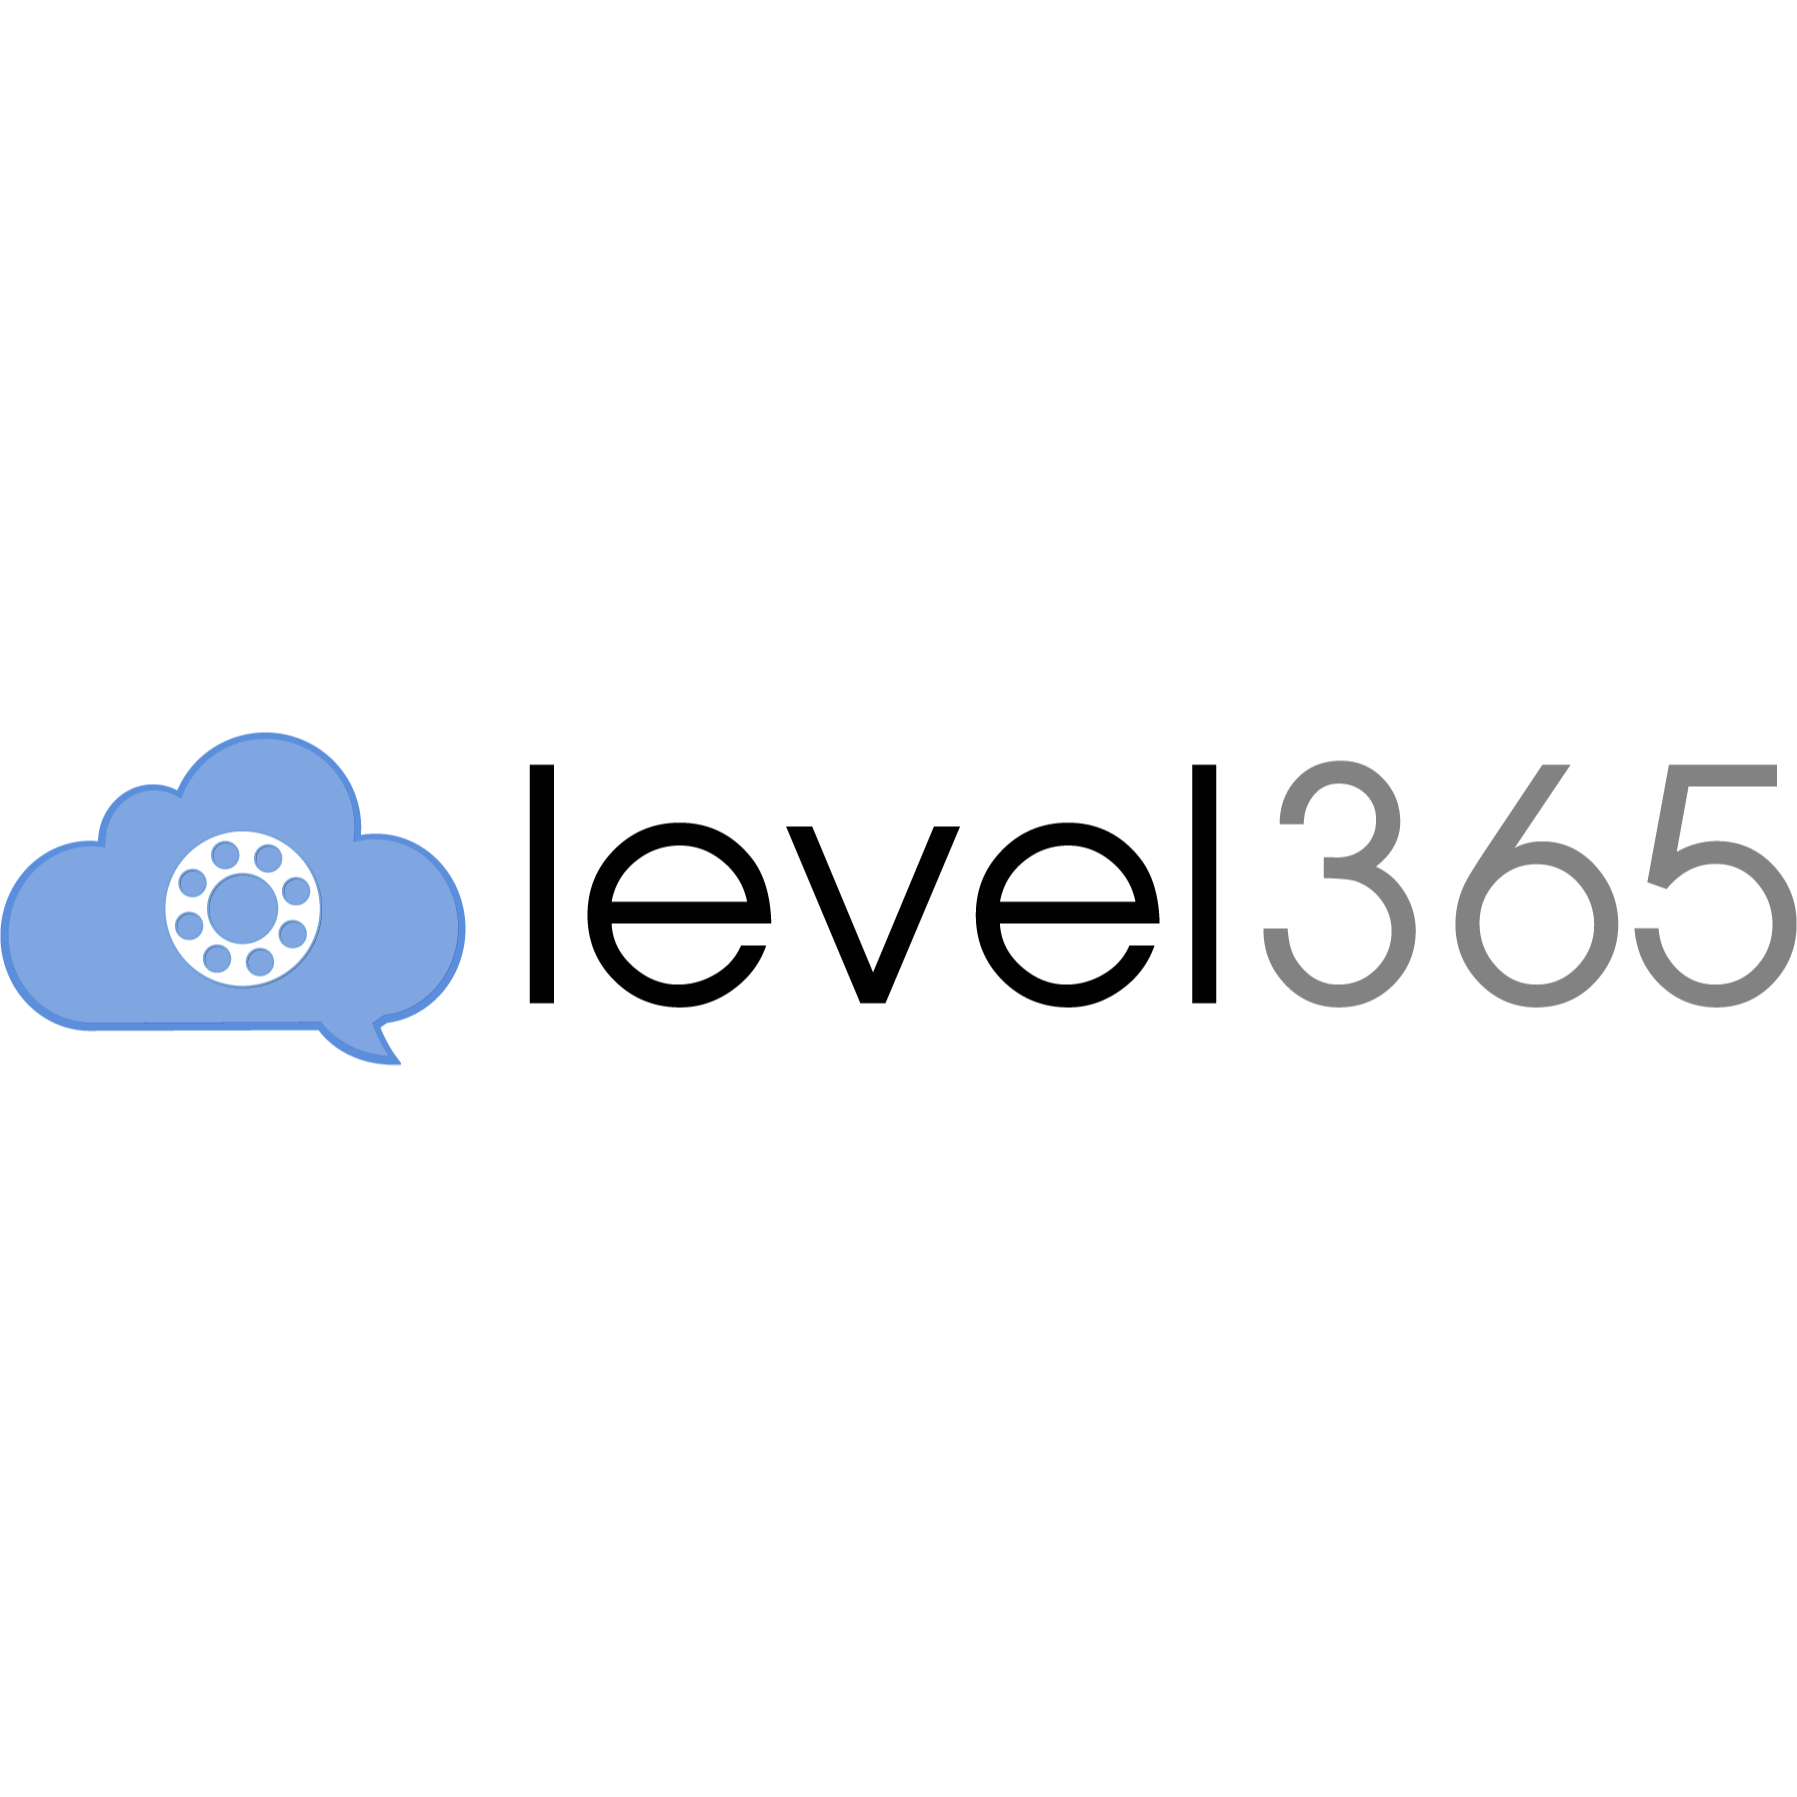 Level365 - Communication and Collaboration for Businesses Level365 Indianapolis (317)810-0024